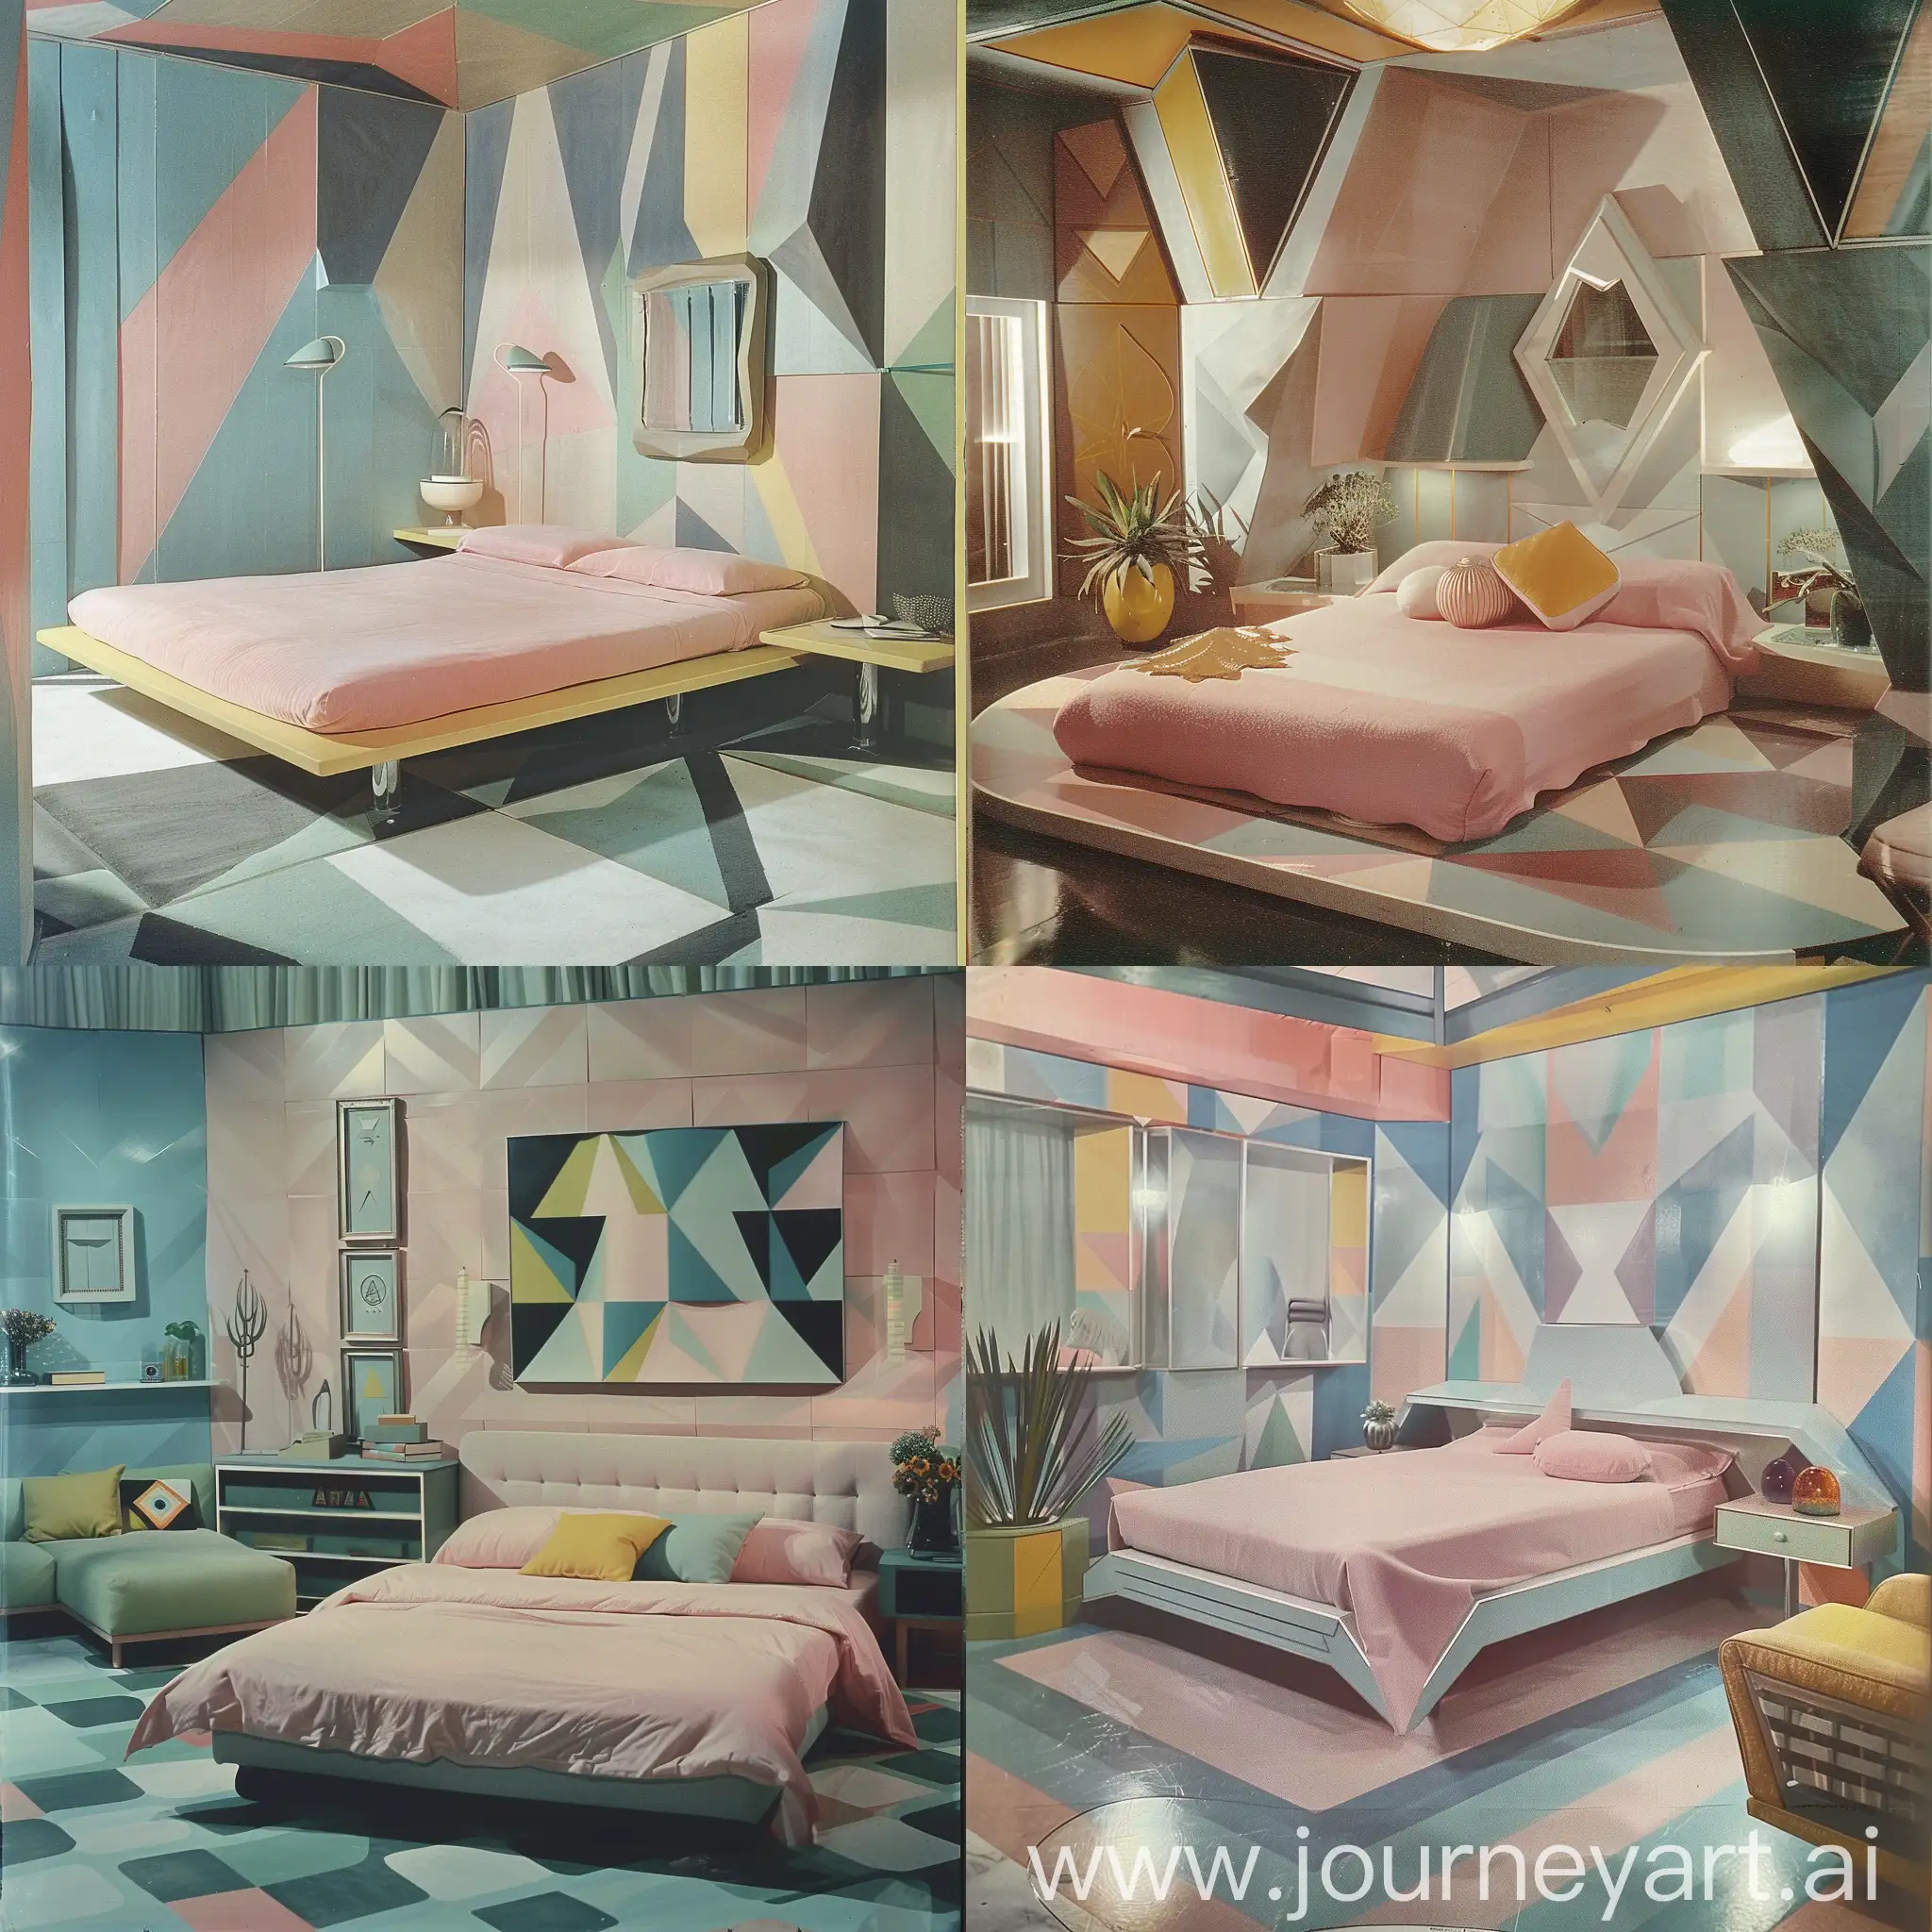 Vintage-Geometric-Decor-Bedroom-with-Pastel-Pink-Bed